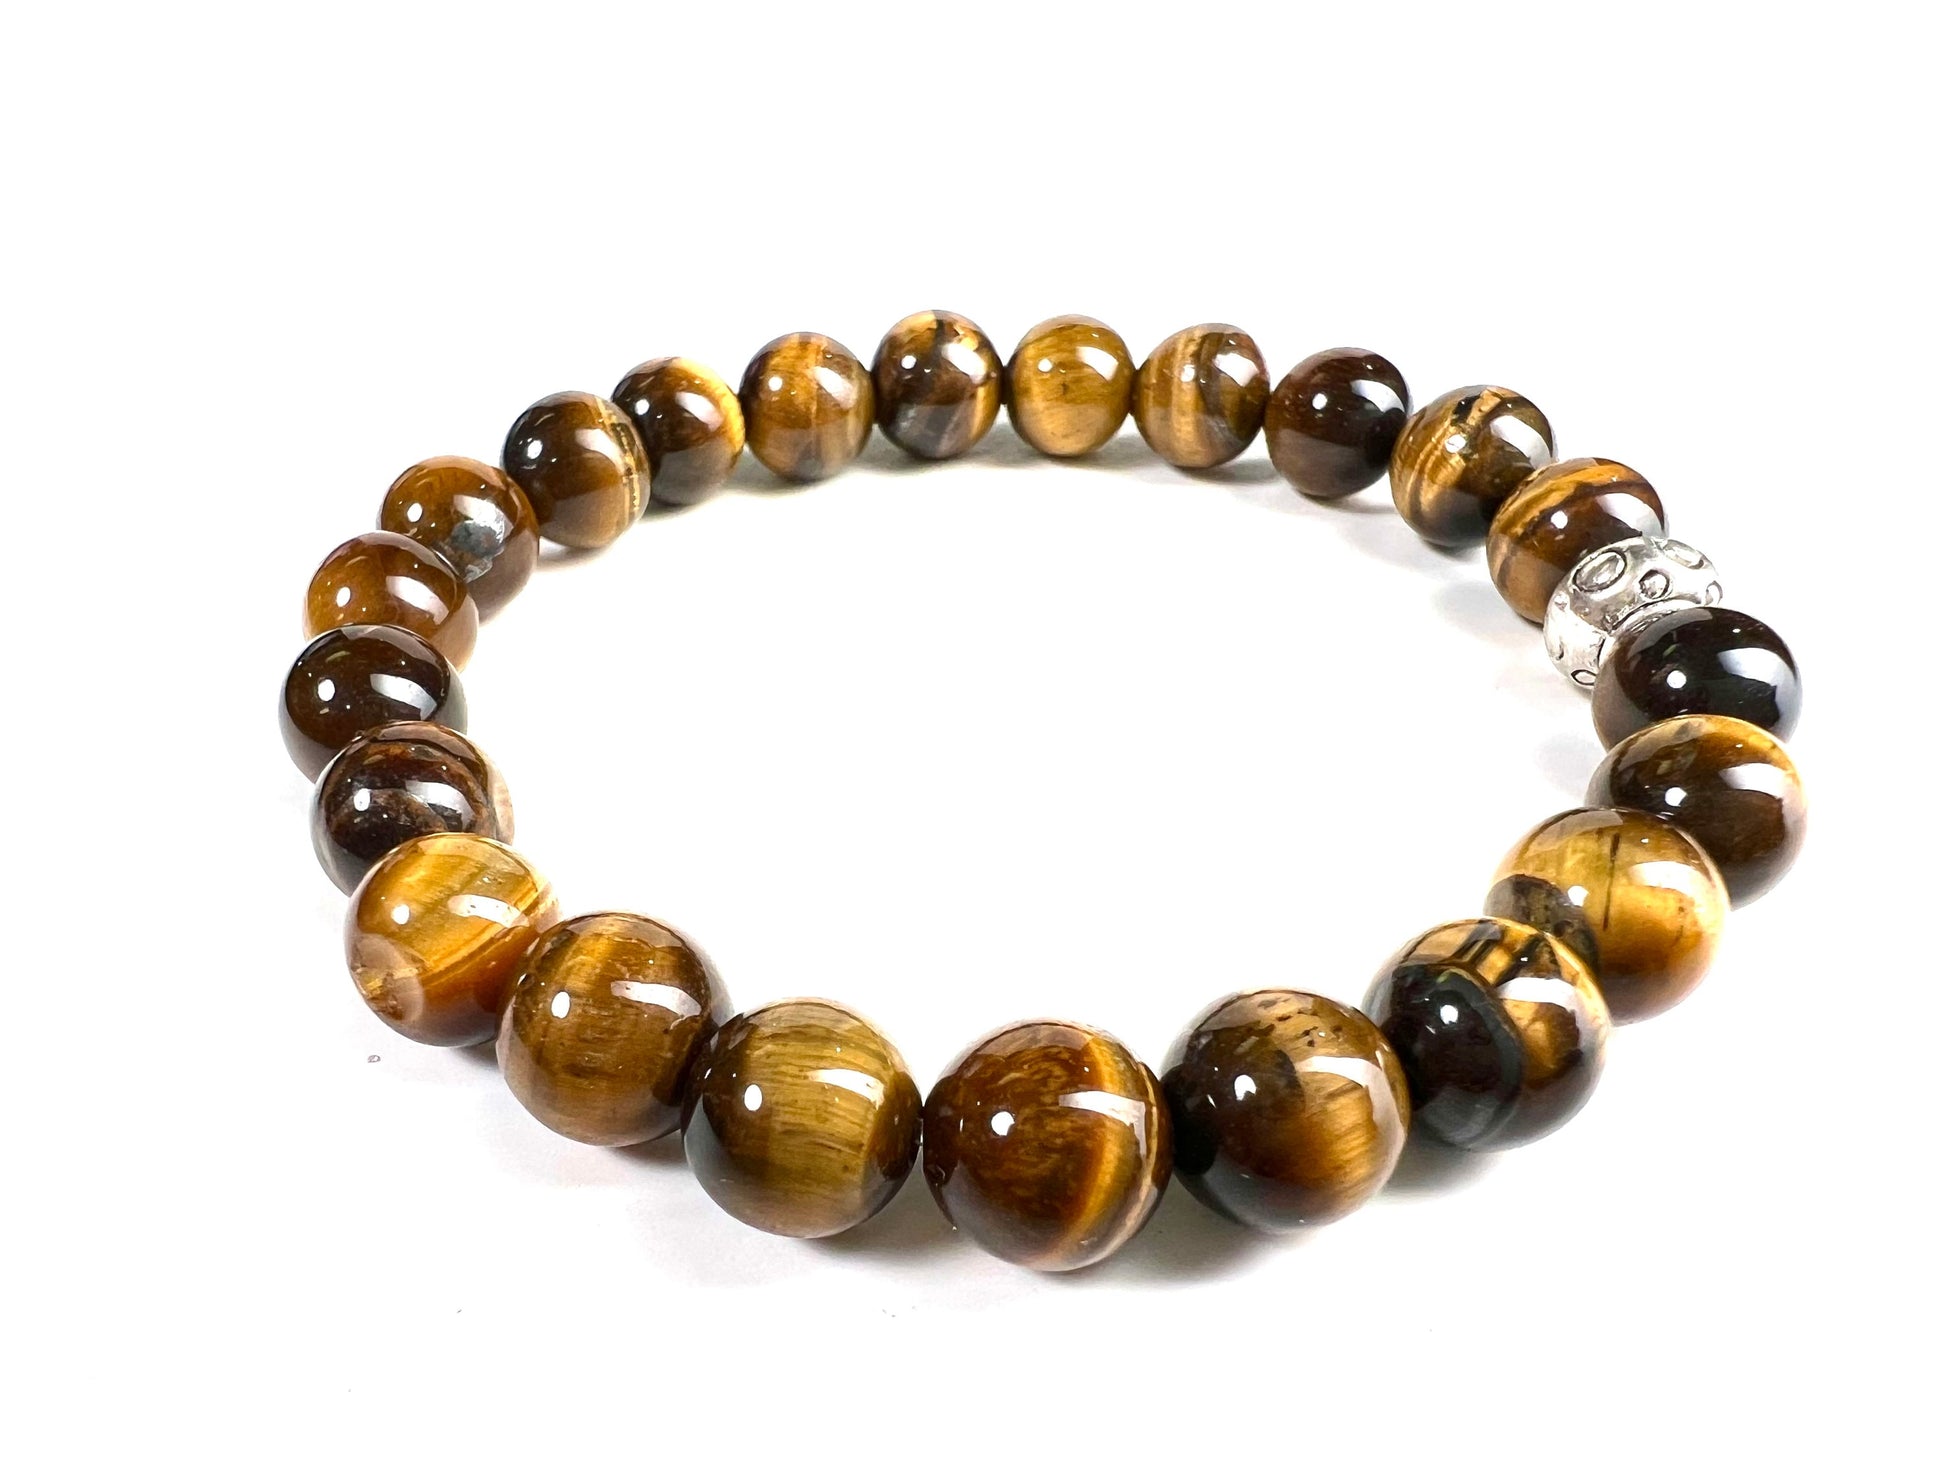 Tiger Eye smooth 8mm natural Gemstone Stretchy Bracelet. Strength and power healing crystal